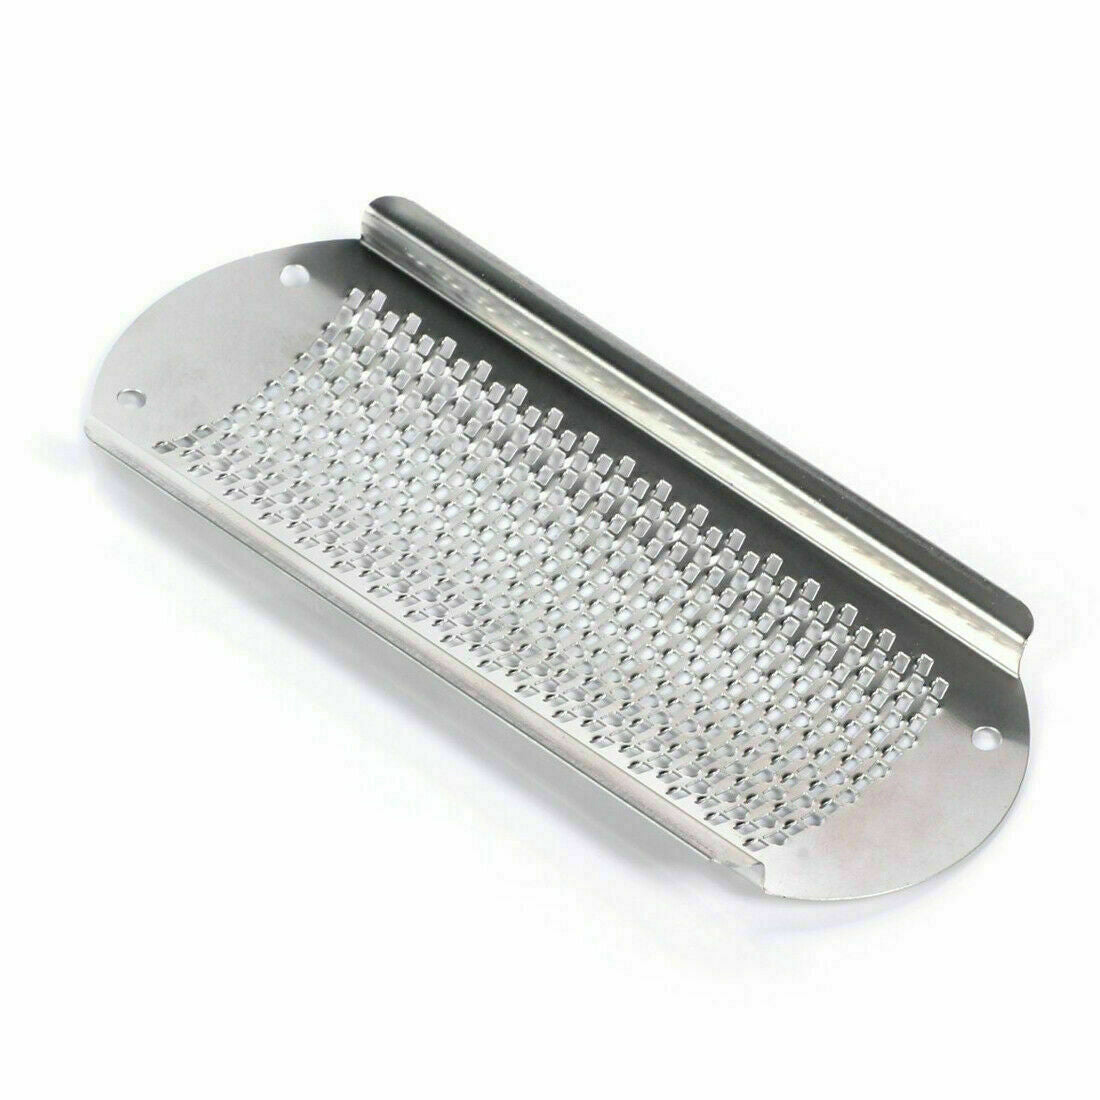 Pro 2 In1 Foot Callus Remover File  Stainless Steel  Pedicure Tools